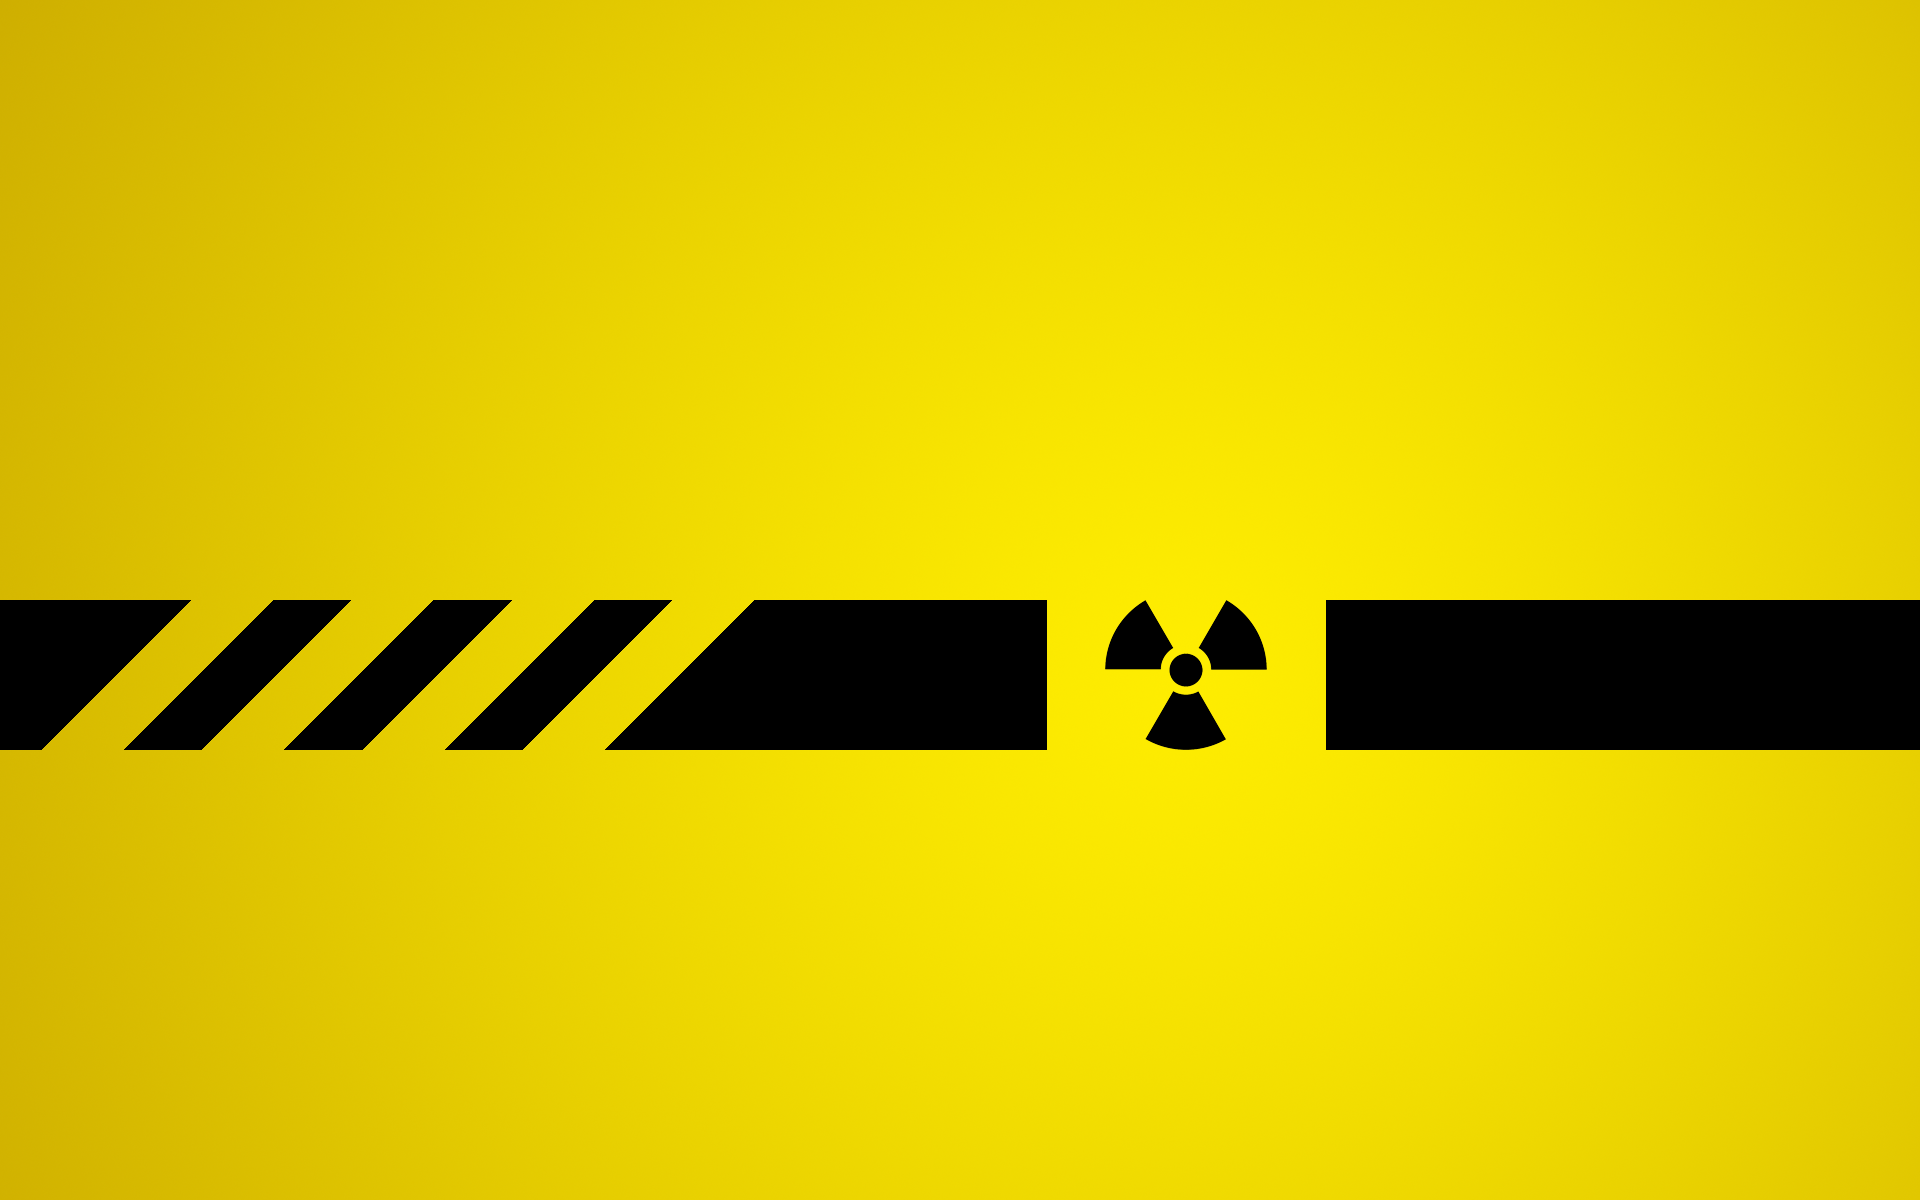 Nuclear Wallpaper Nuclear power wallpaper by mb